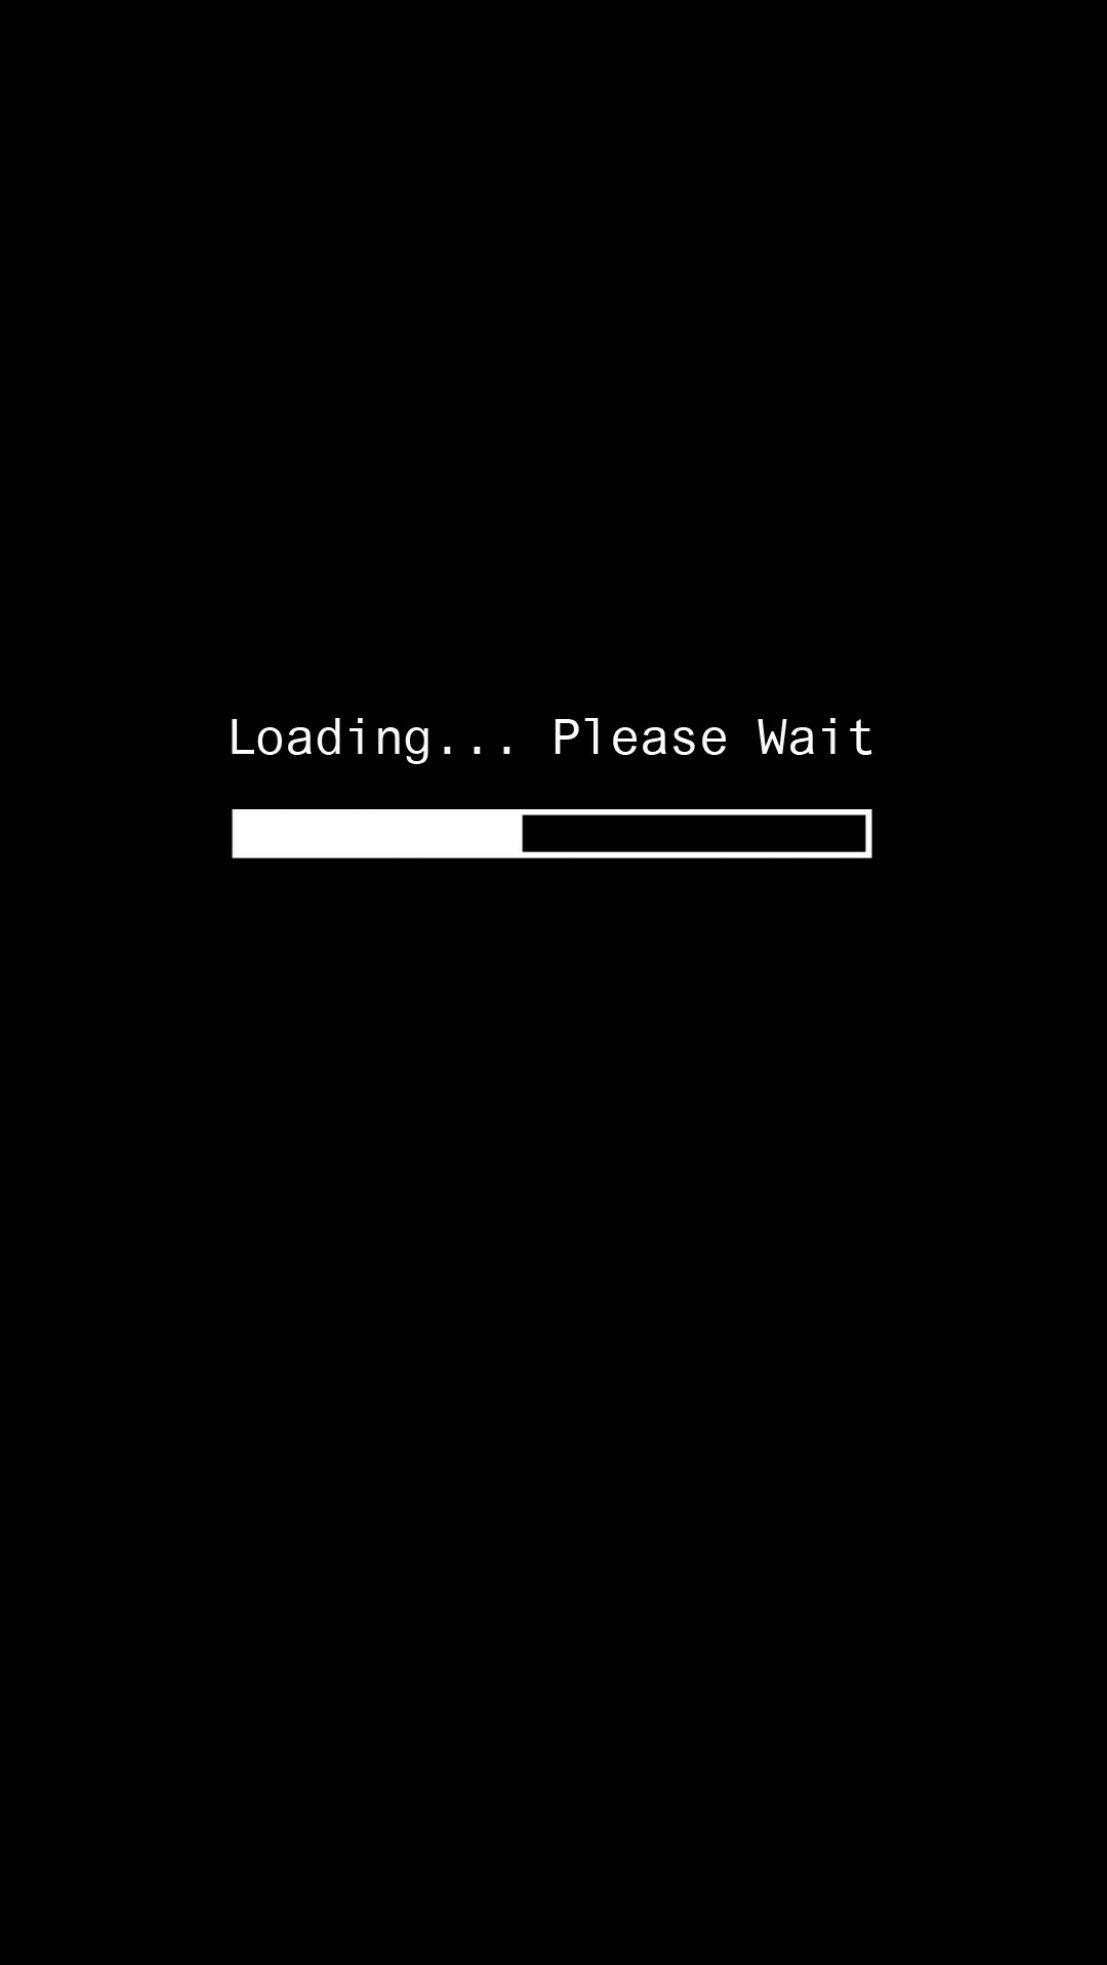 #loading #black #wallpaper #android #iphone. Wallpaper